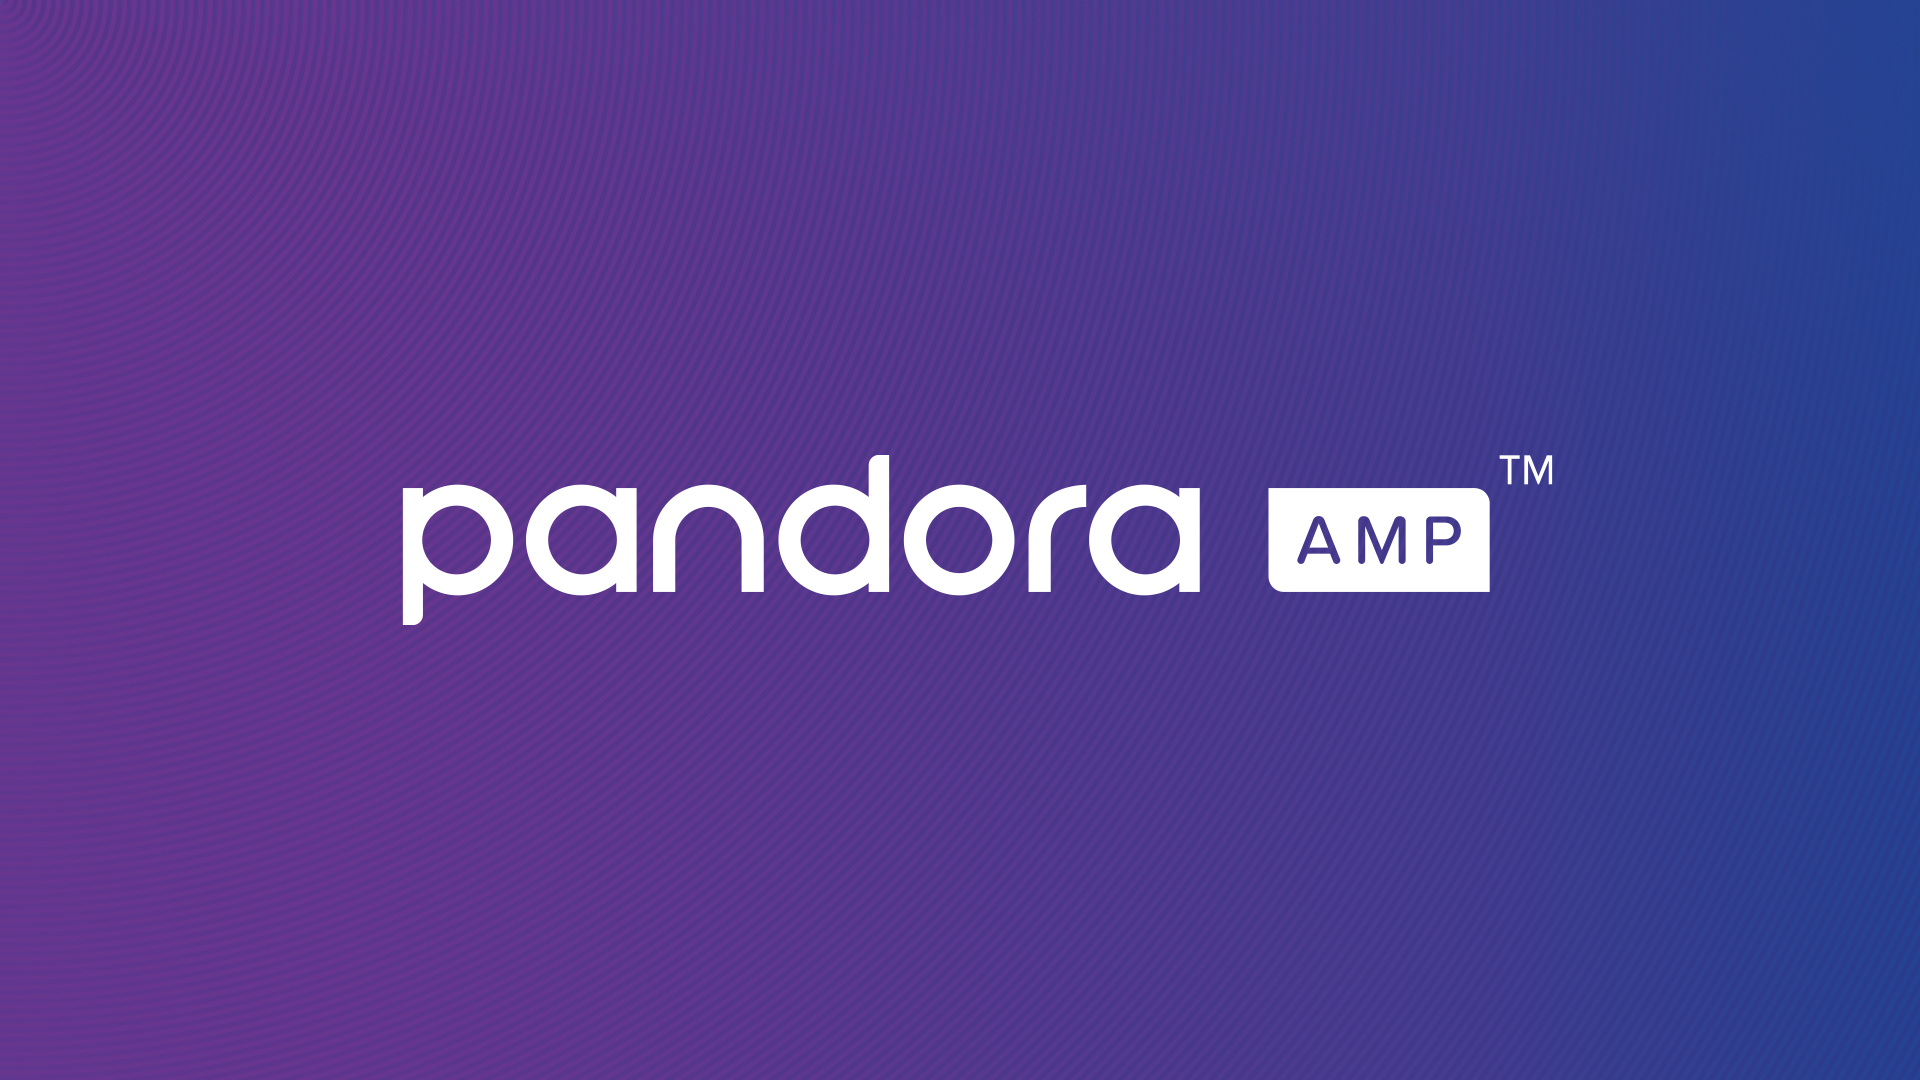 The Complete Guide to Pandora AMP